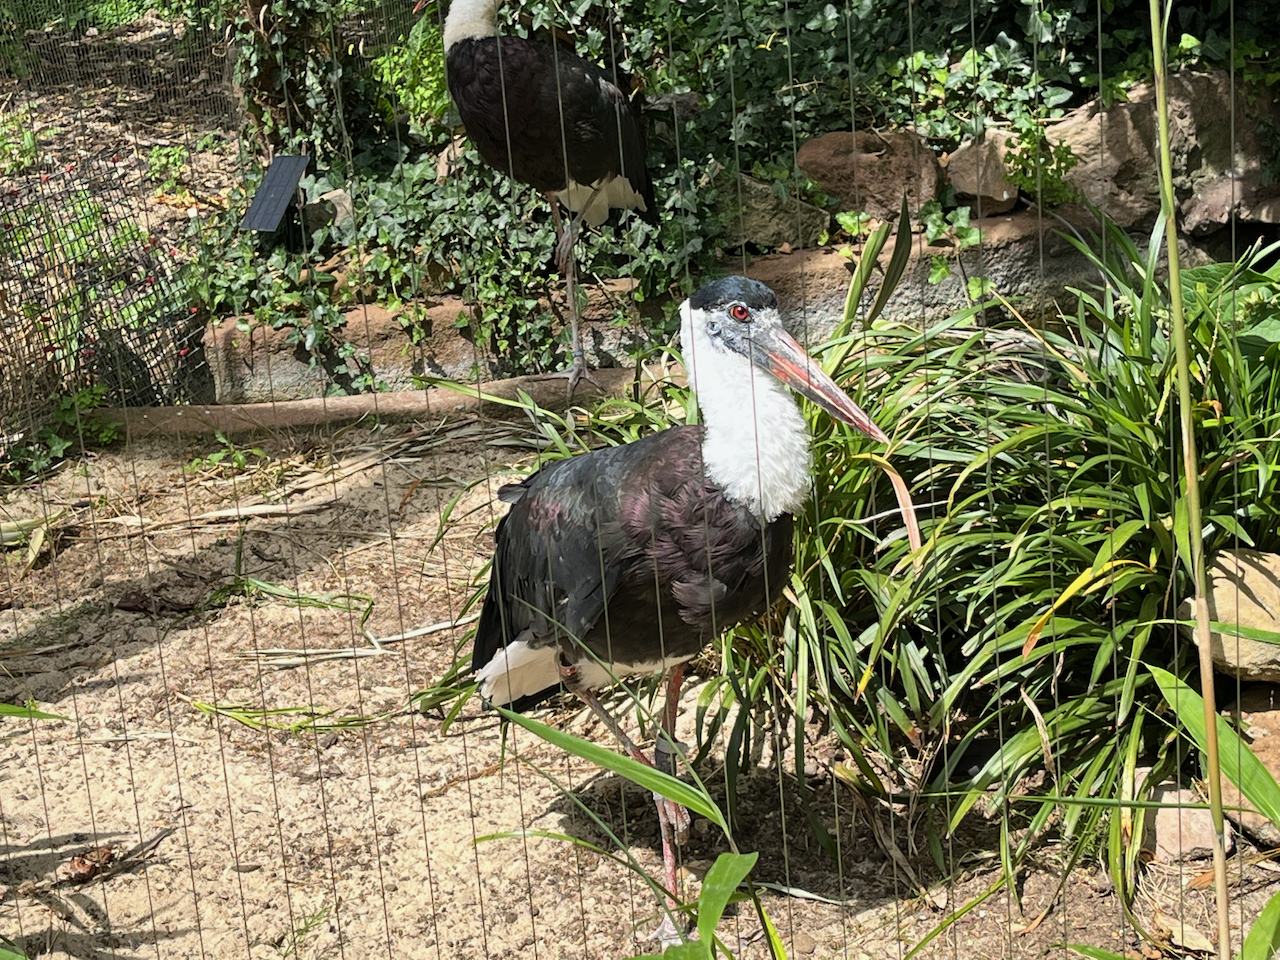 A Woolly-Necked Stork standing in the sunshine. It has a black body, a white neck and a long beak.